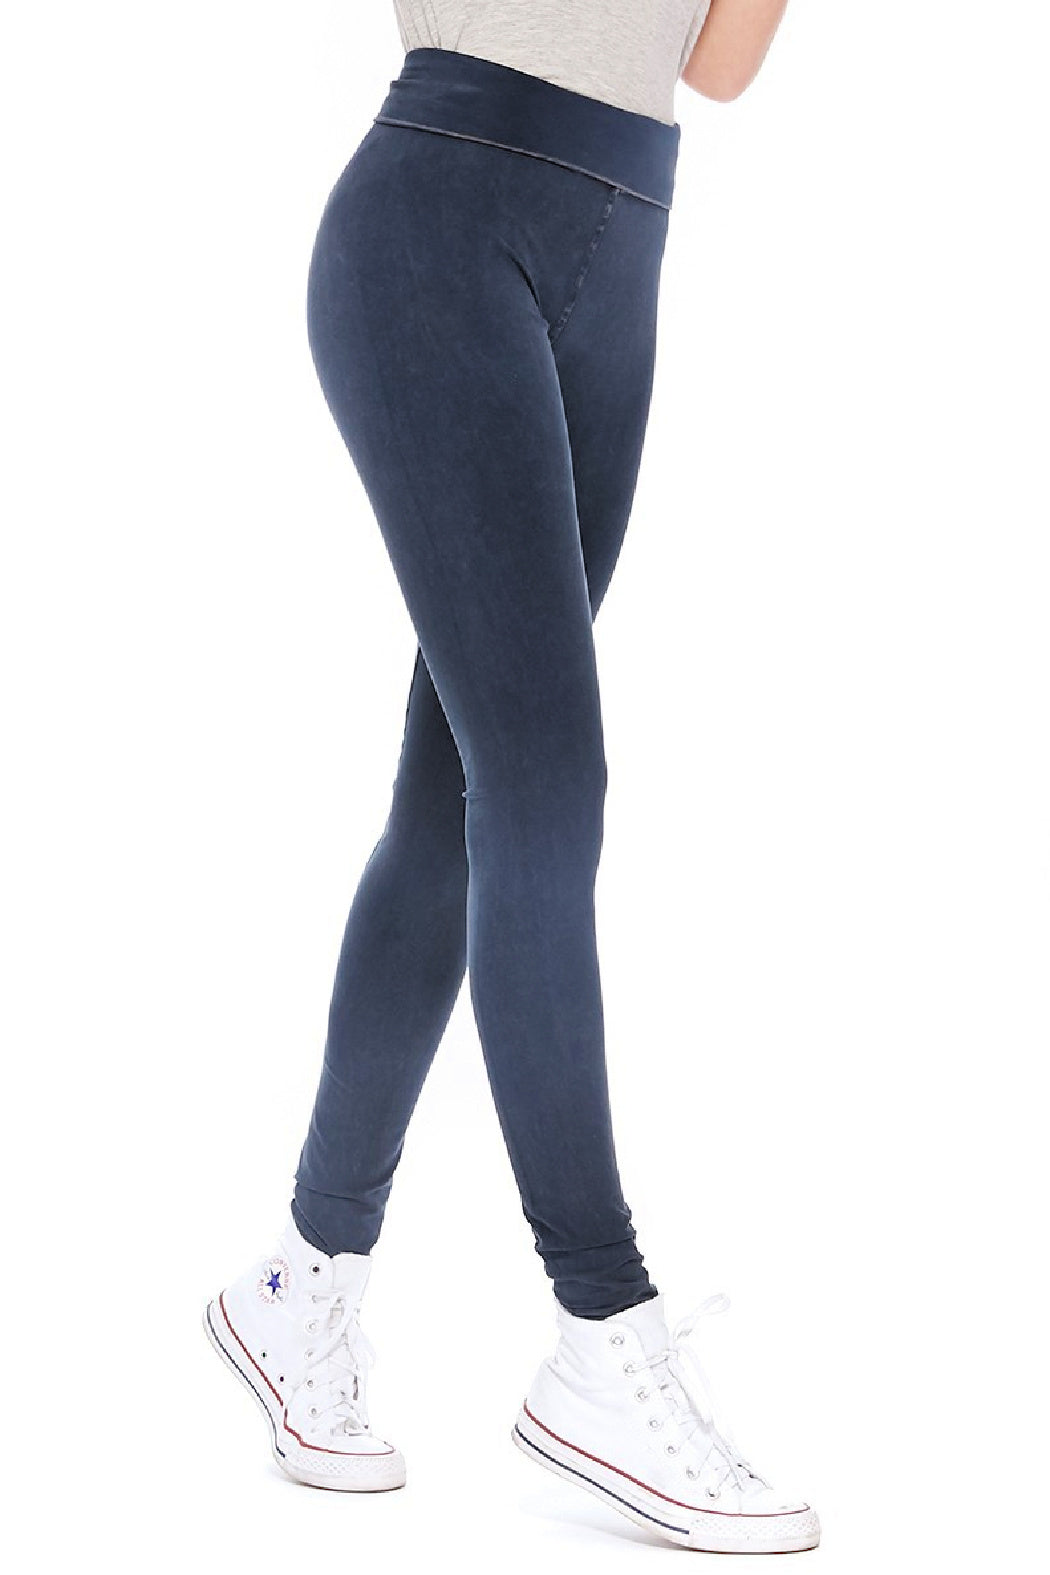 T-Party Mineral Wash Foldover Legging–